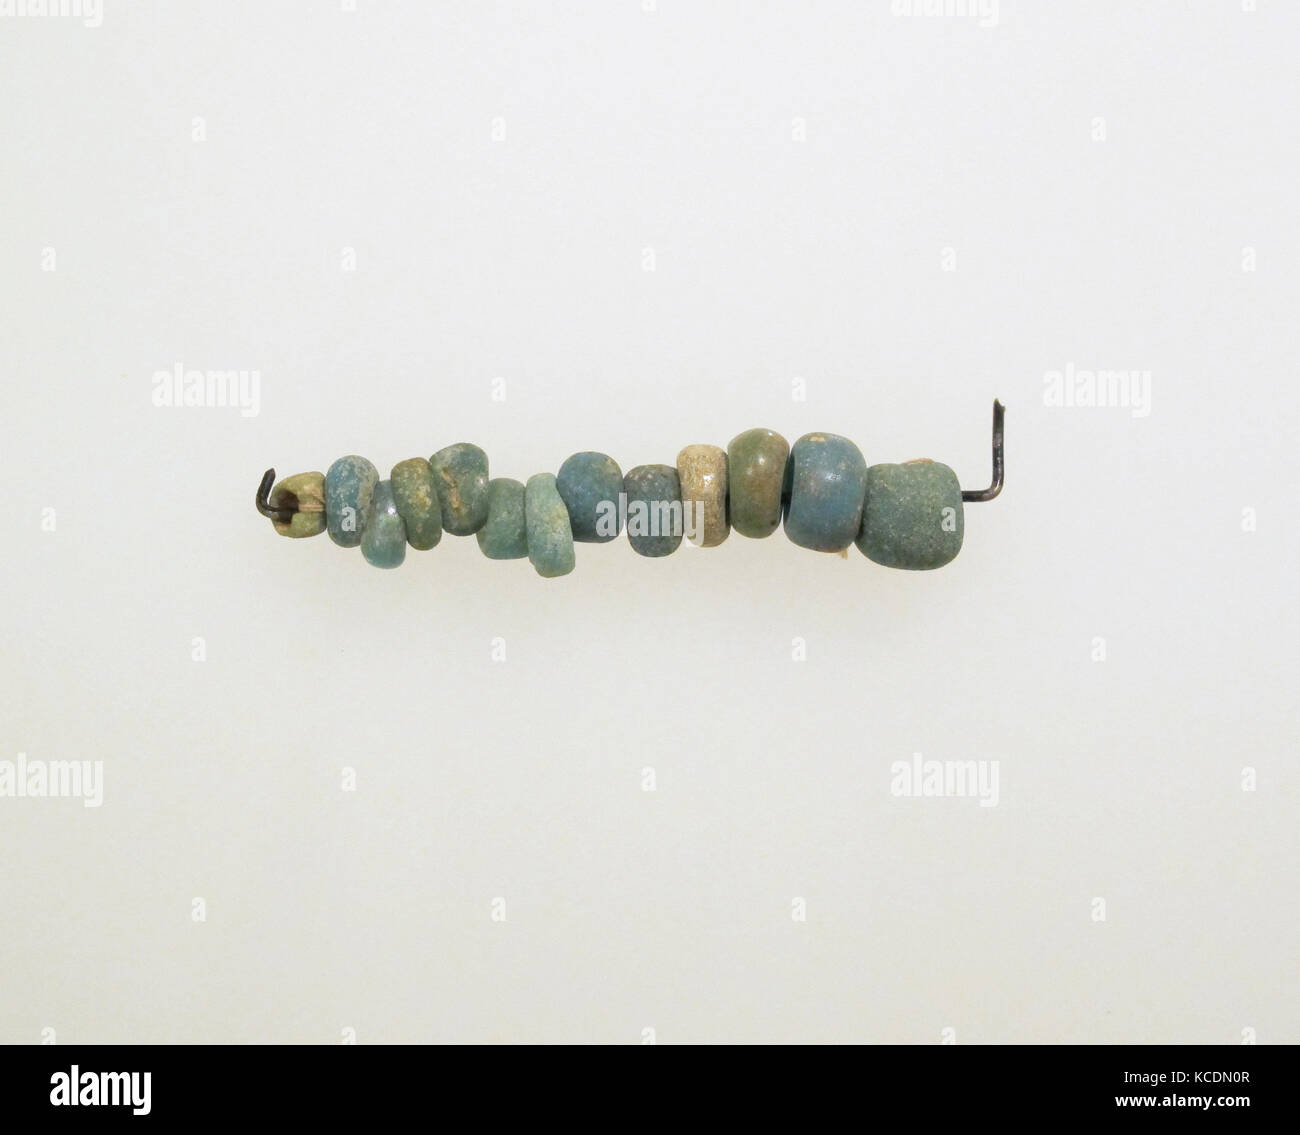 Beads, 13, Glass, Other: 2 7/16 in. (6.3 cm), Glass Stock Photo